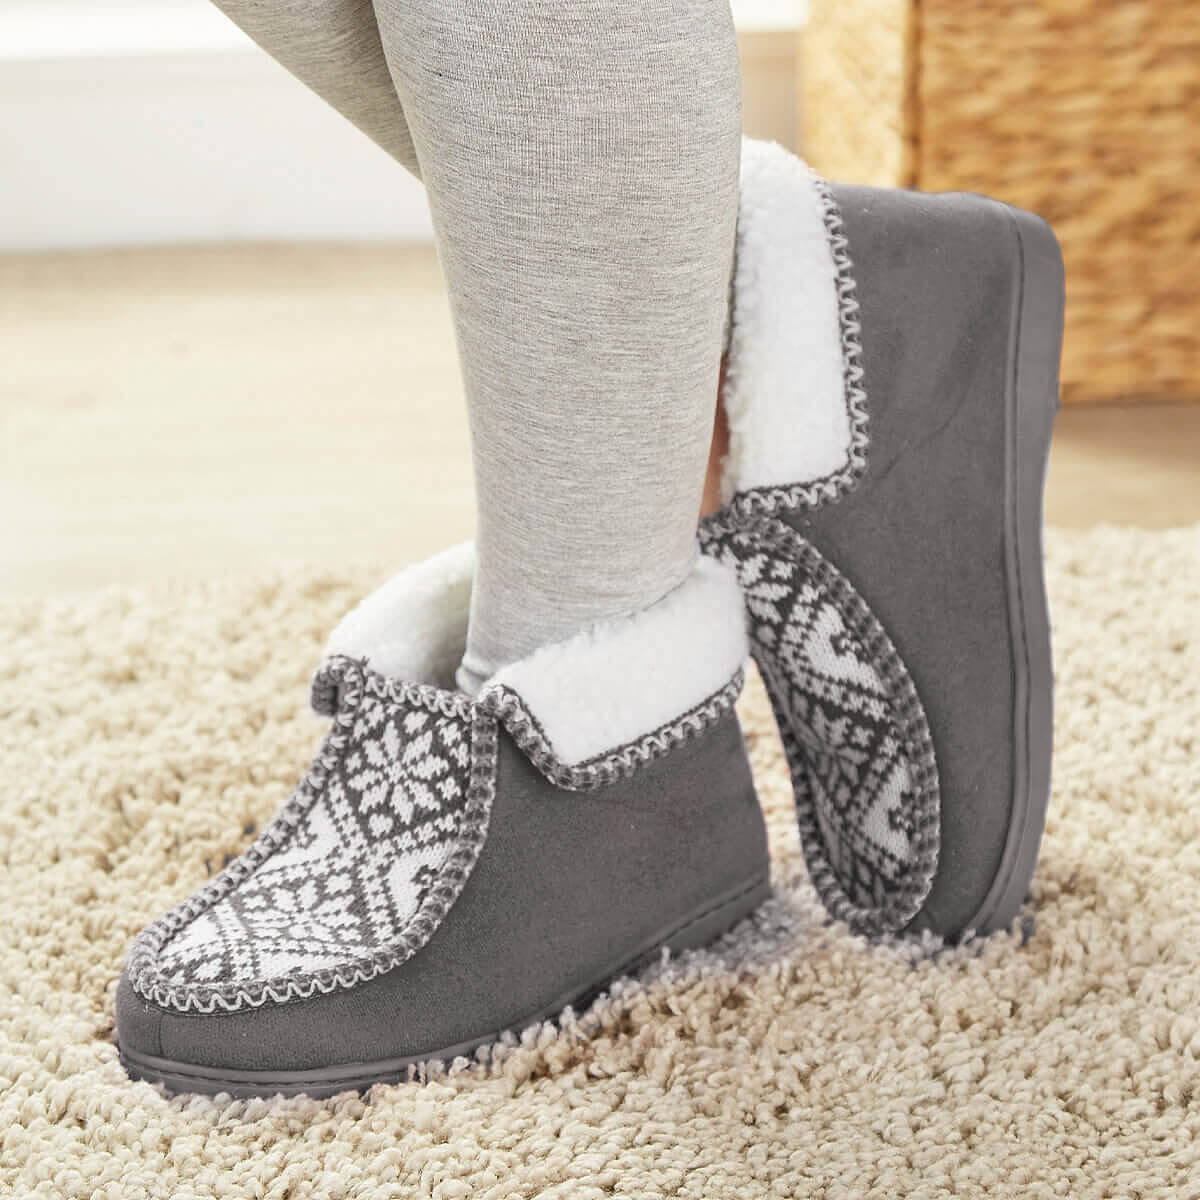 slippers that cover ankles